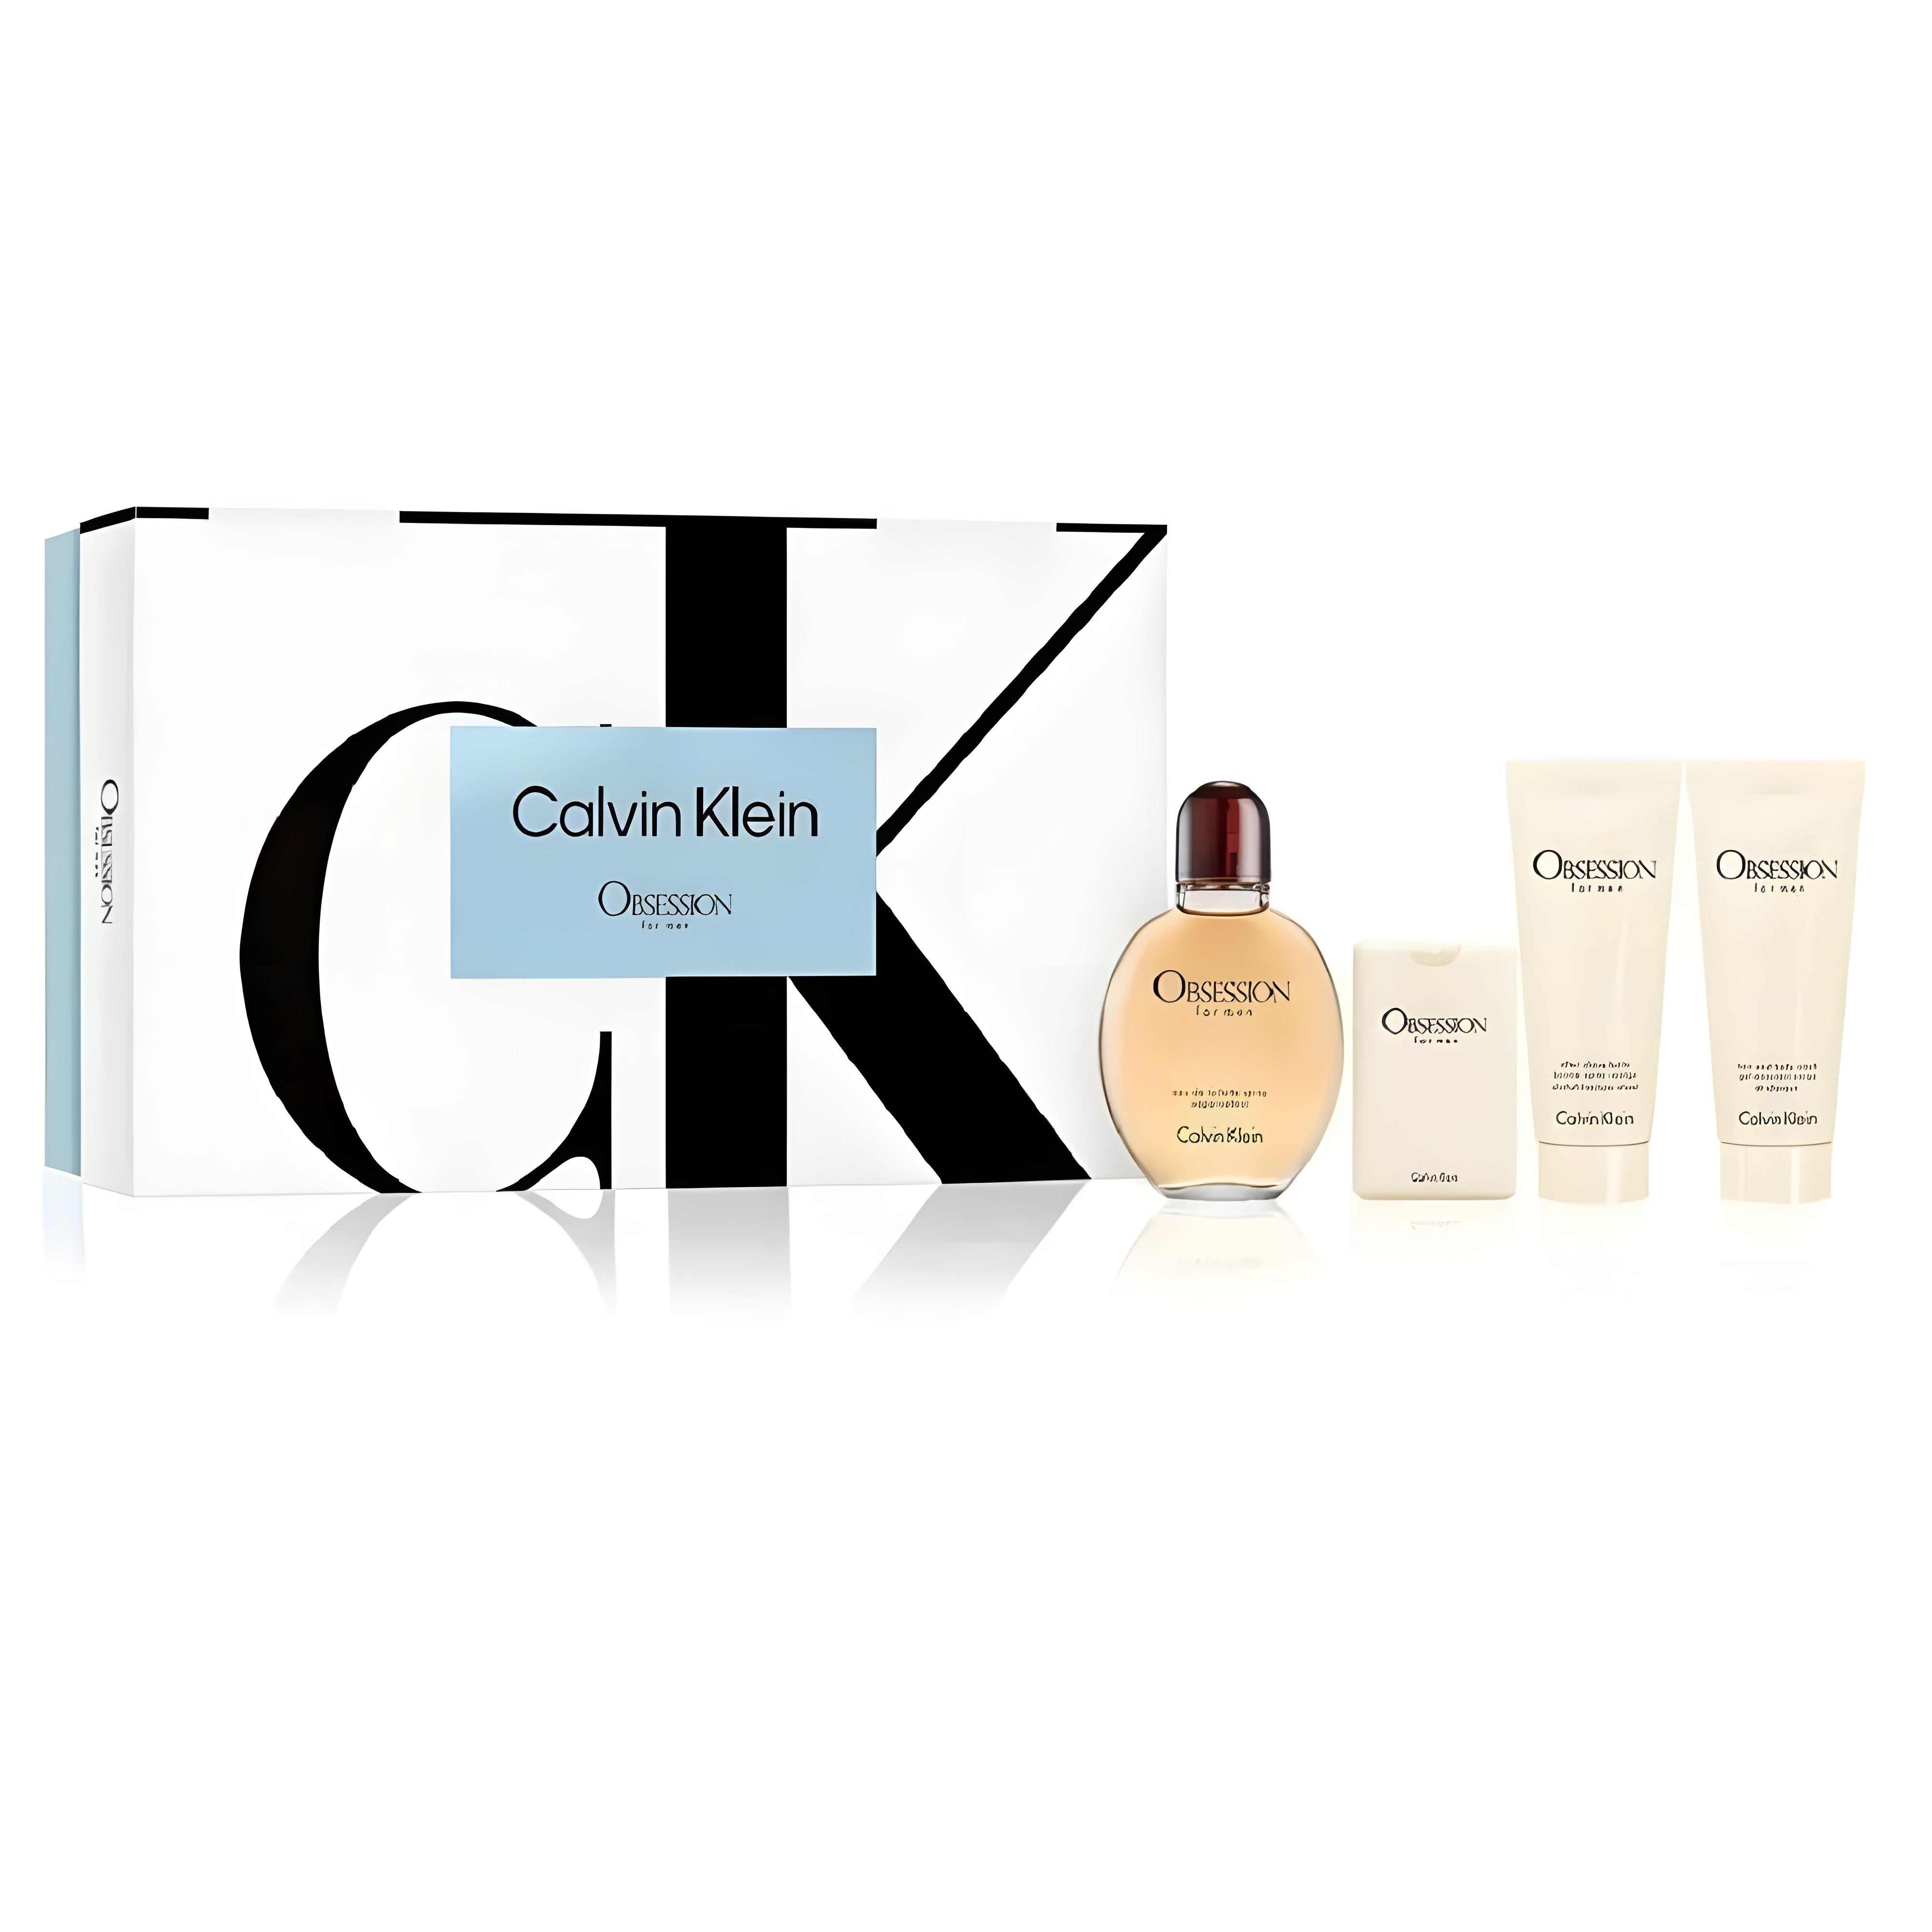 Calvin Klein Obsession Men's Grooming Collection | My Perfume Shop Australia